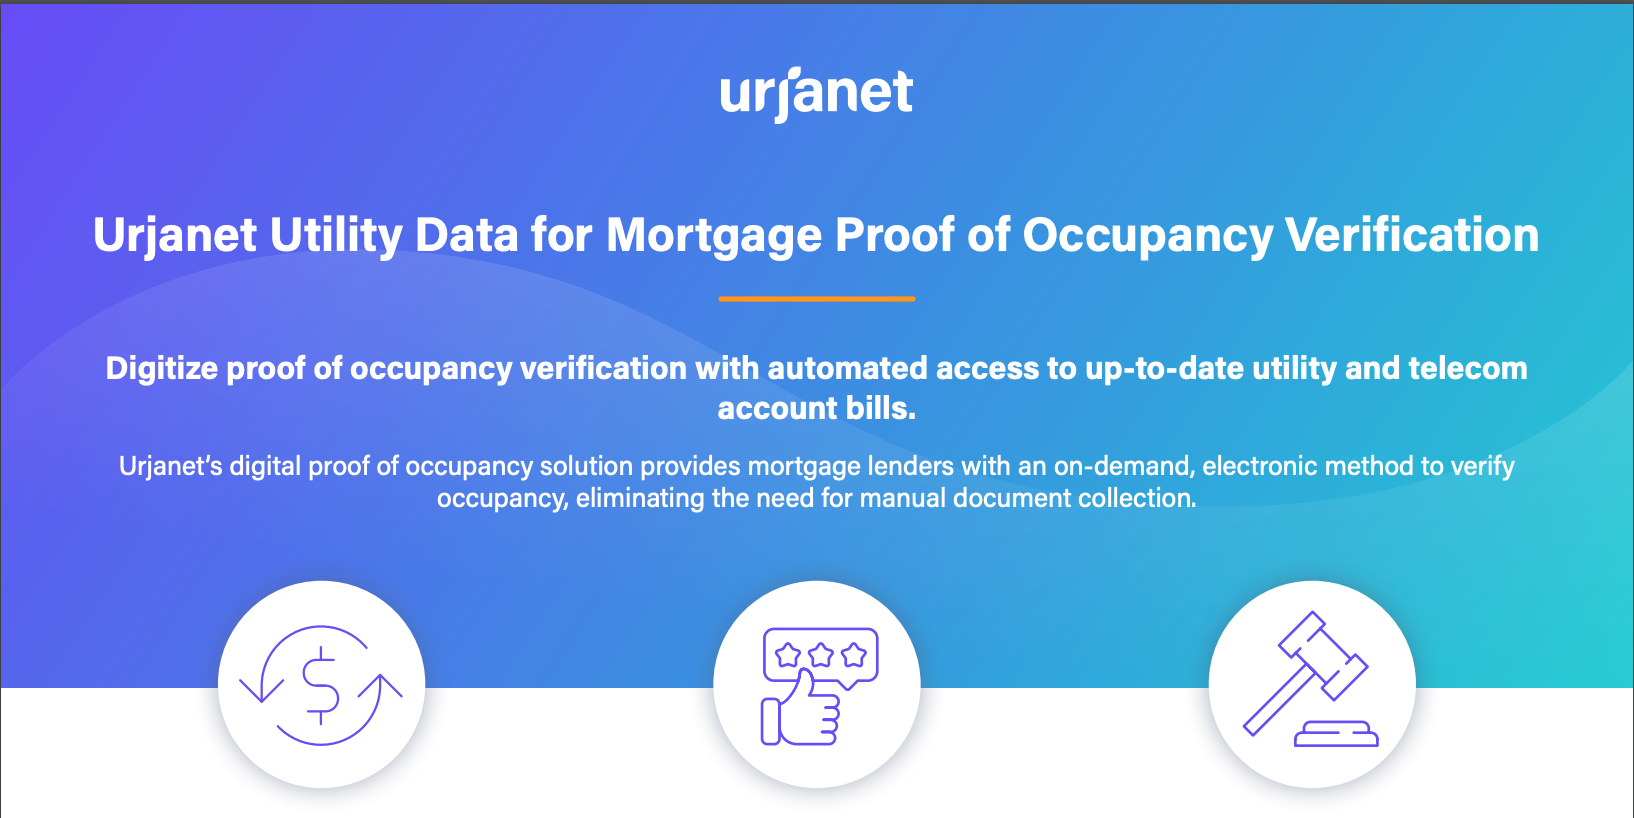 Urjanet Utility Data for Mortgage Proof of Occupancy Verification